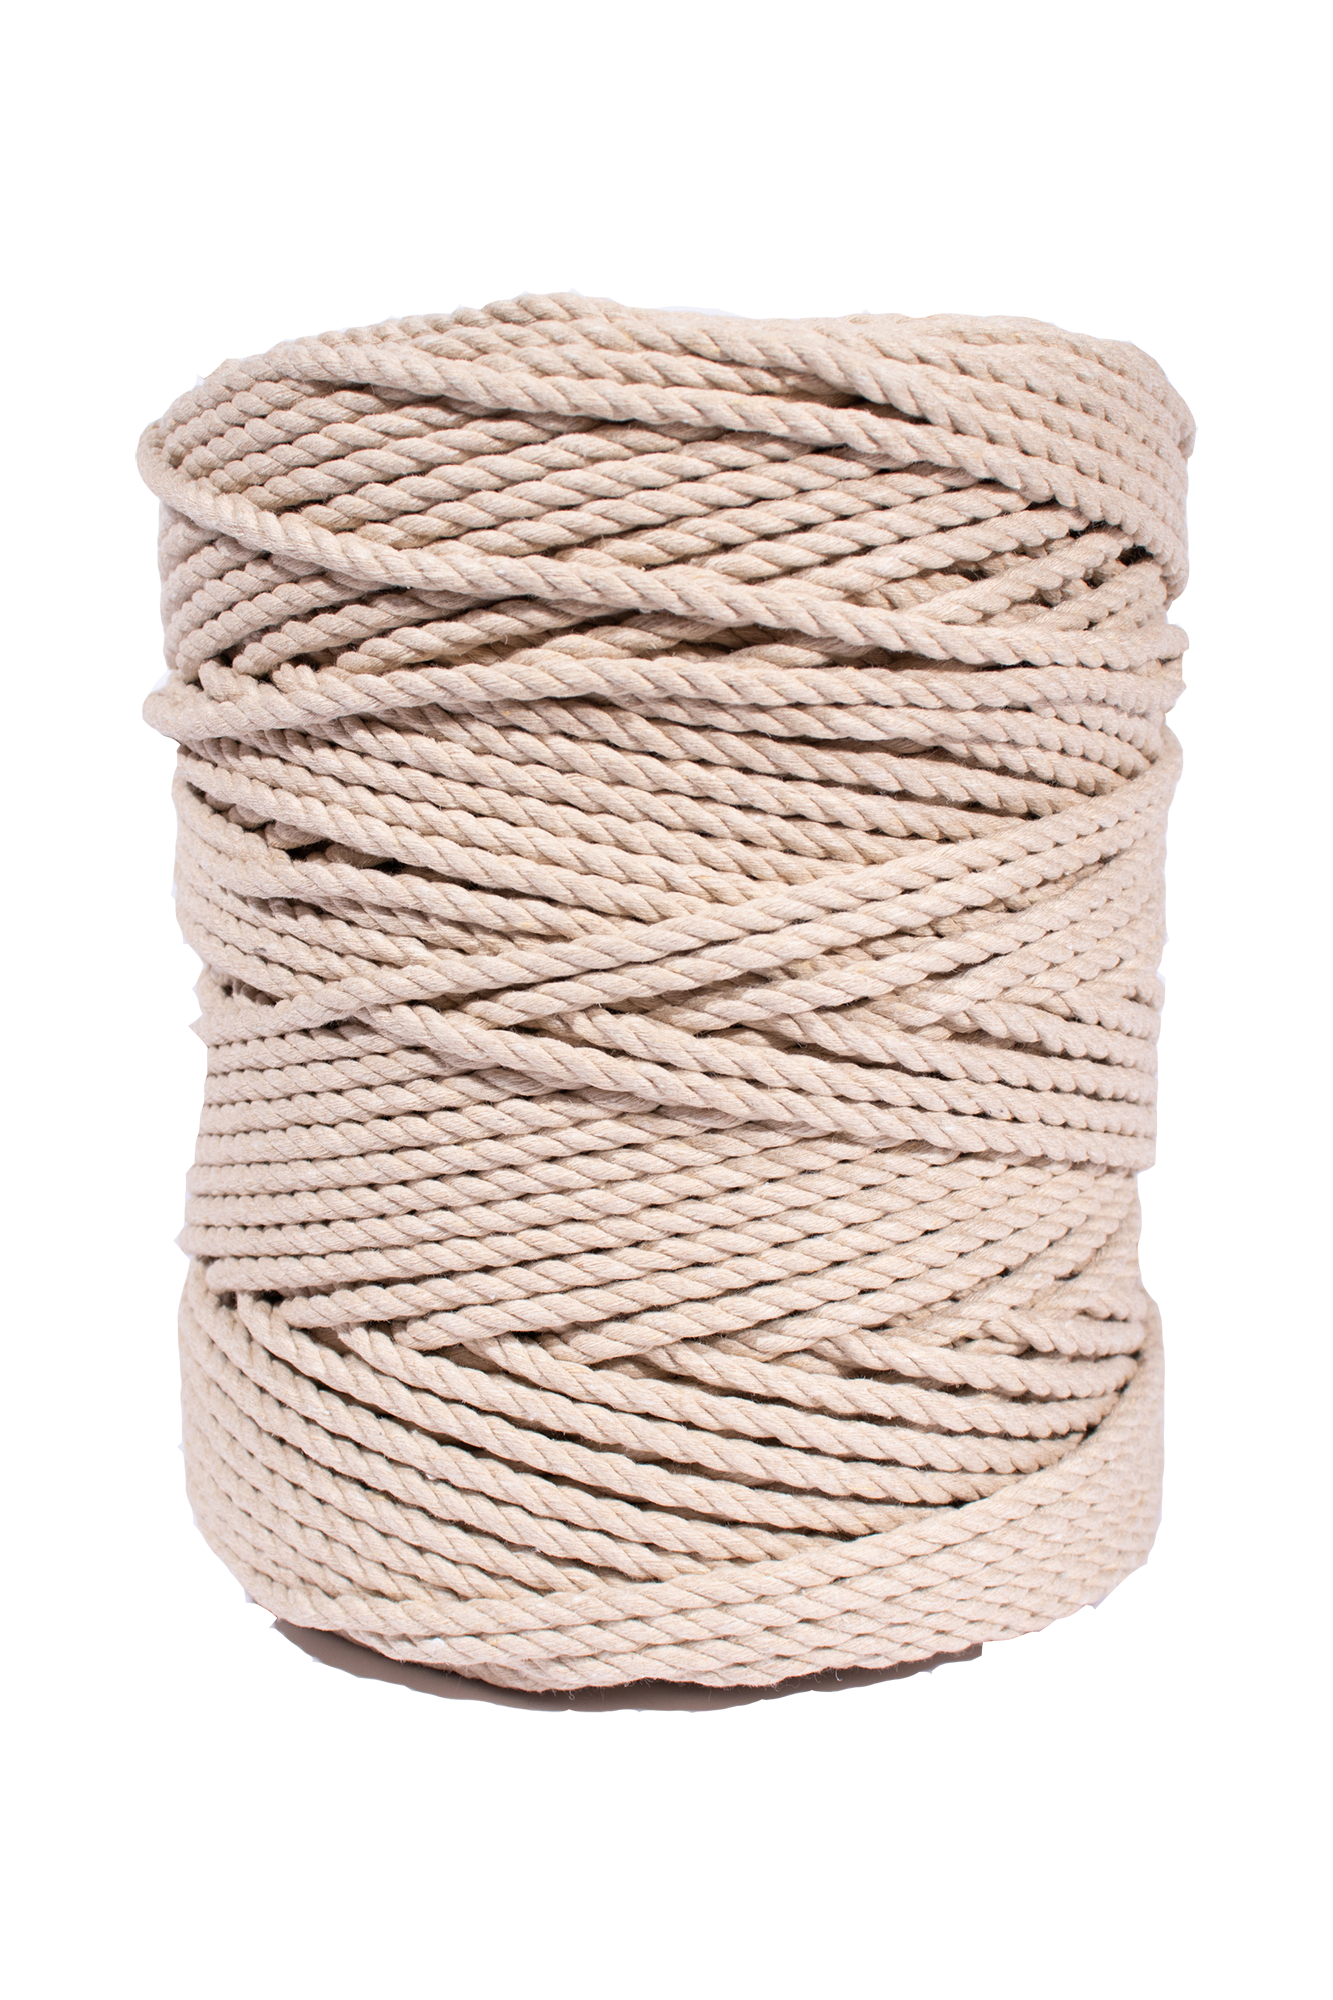 5mm 100% Recycled Cotton Rope - 600ft Spool